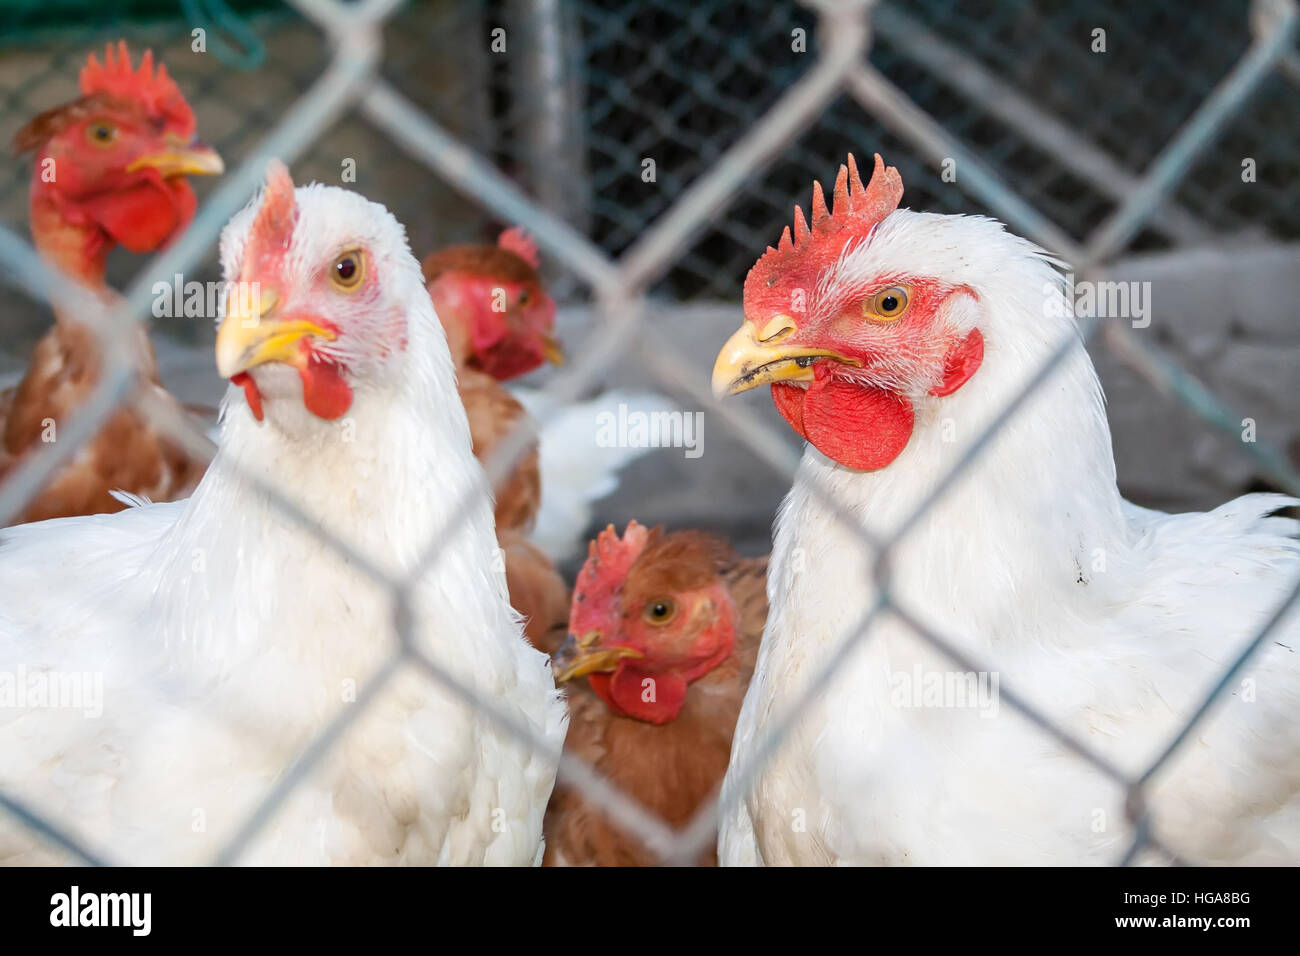 Two white chickens or hens inside a chicken coop or hen house seen through chicken wire. Stock Photo